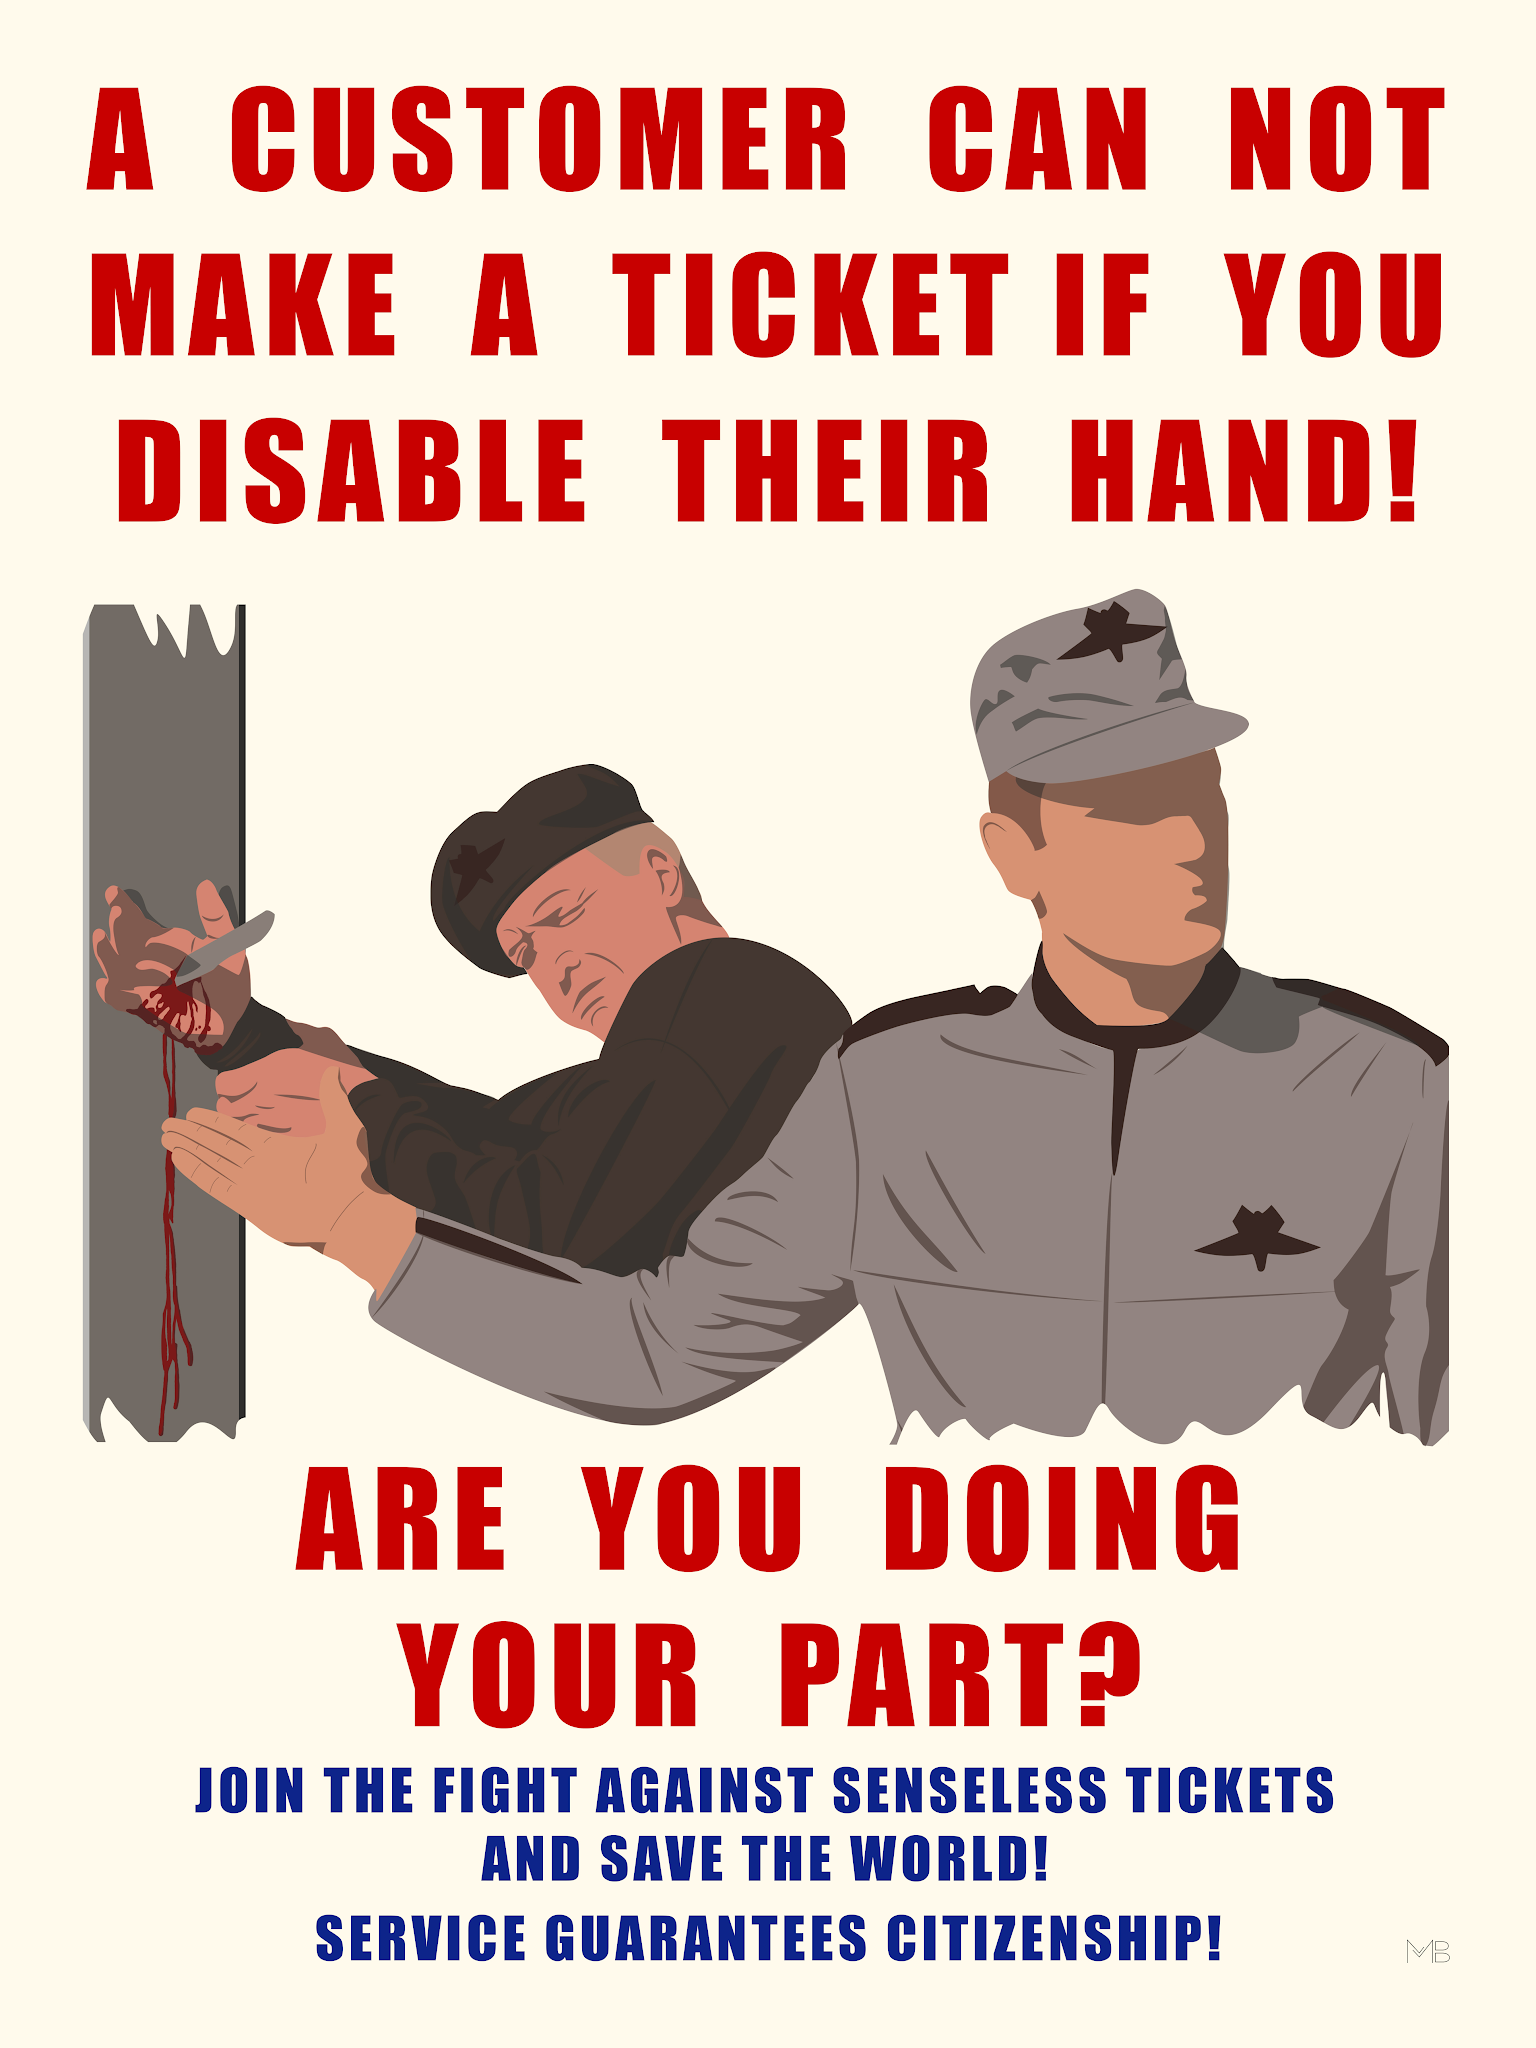 poster - A Customer Can Not Make A Ticket If You Disable Their Hand! Are You Doing Your Part? Join The Fight Against Senseless Tickets And Save The World! Service Guarantees Citizenship!